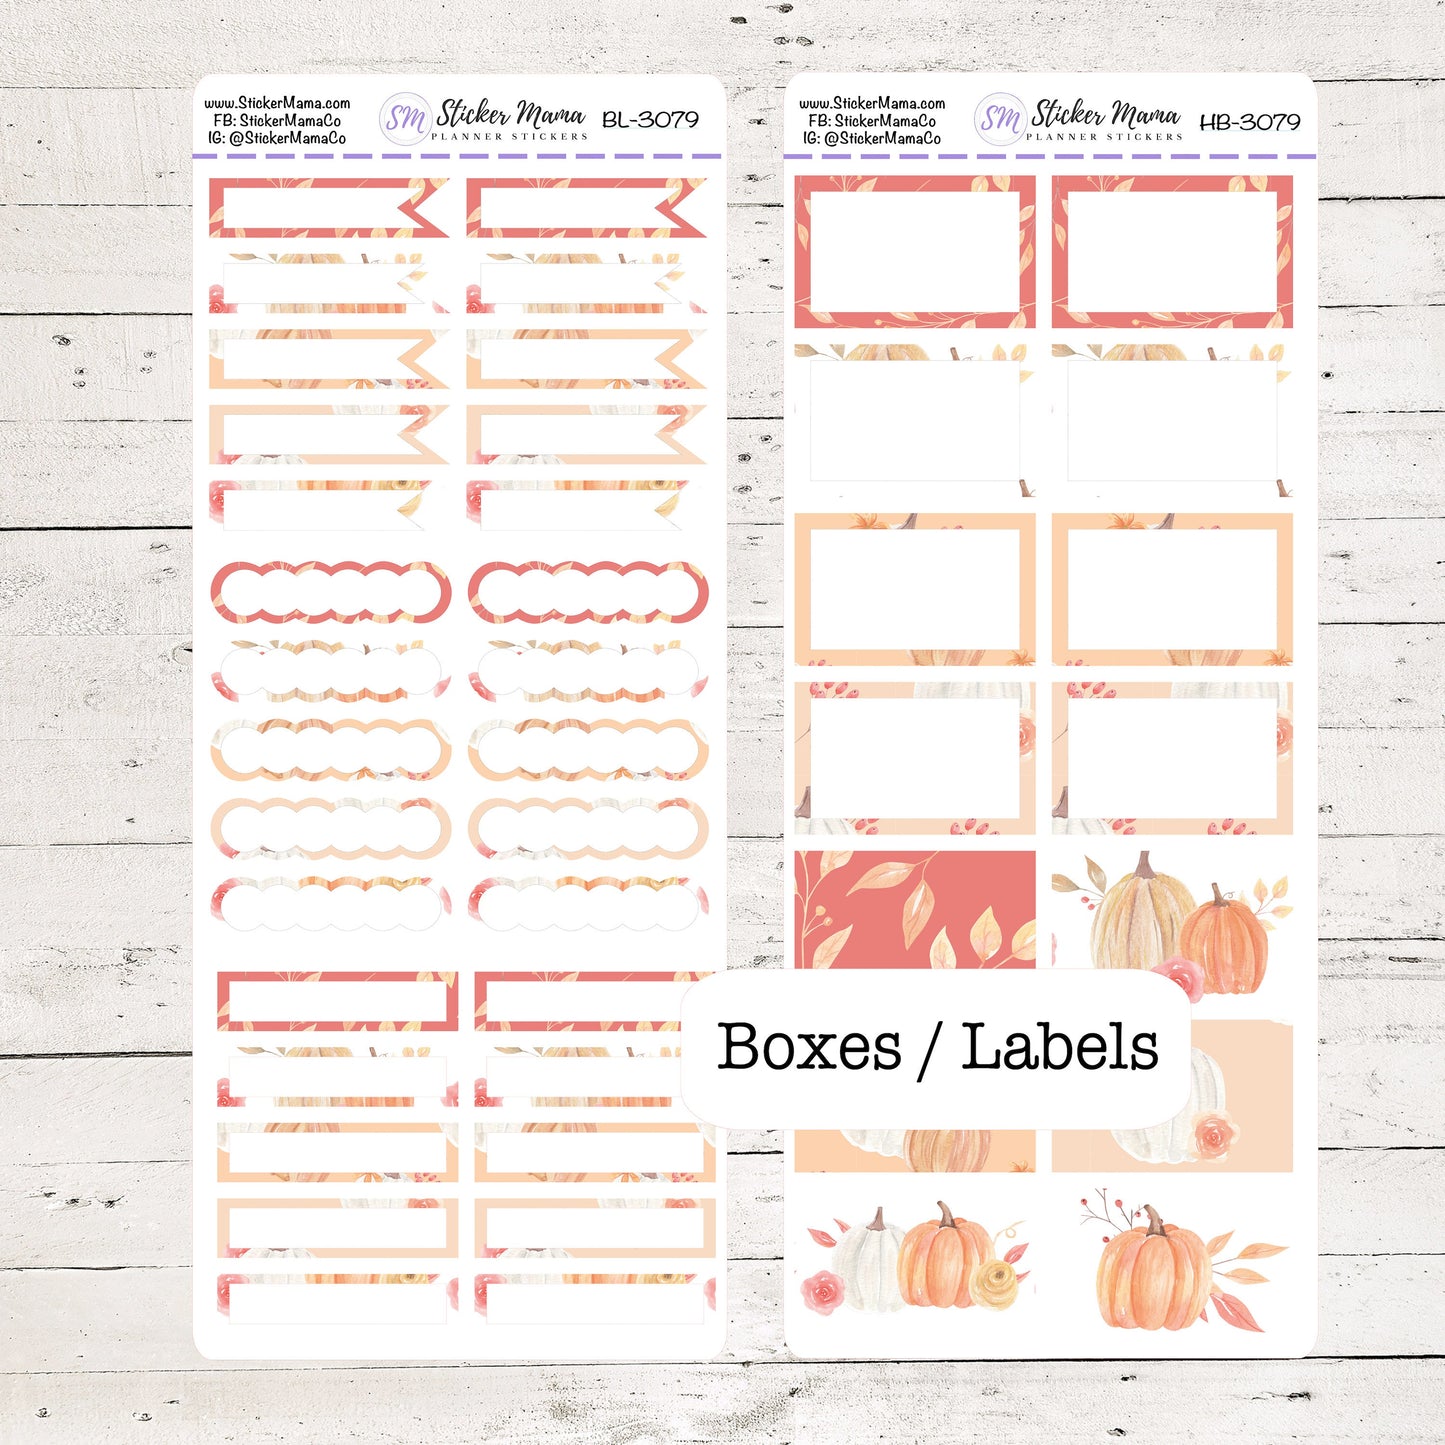 BL-3079 - HB-3079 BASIC Label Stickers - Pumpkins October Stickers - Half Boxes - Planner Stickers - Full Box for Planners